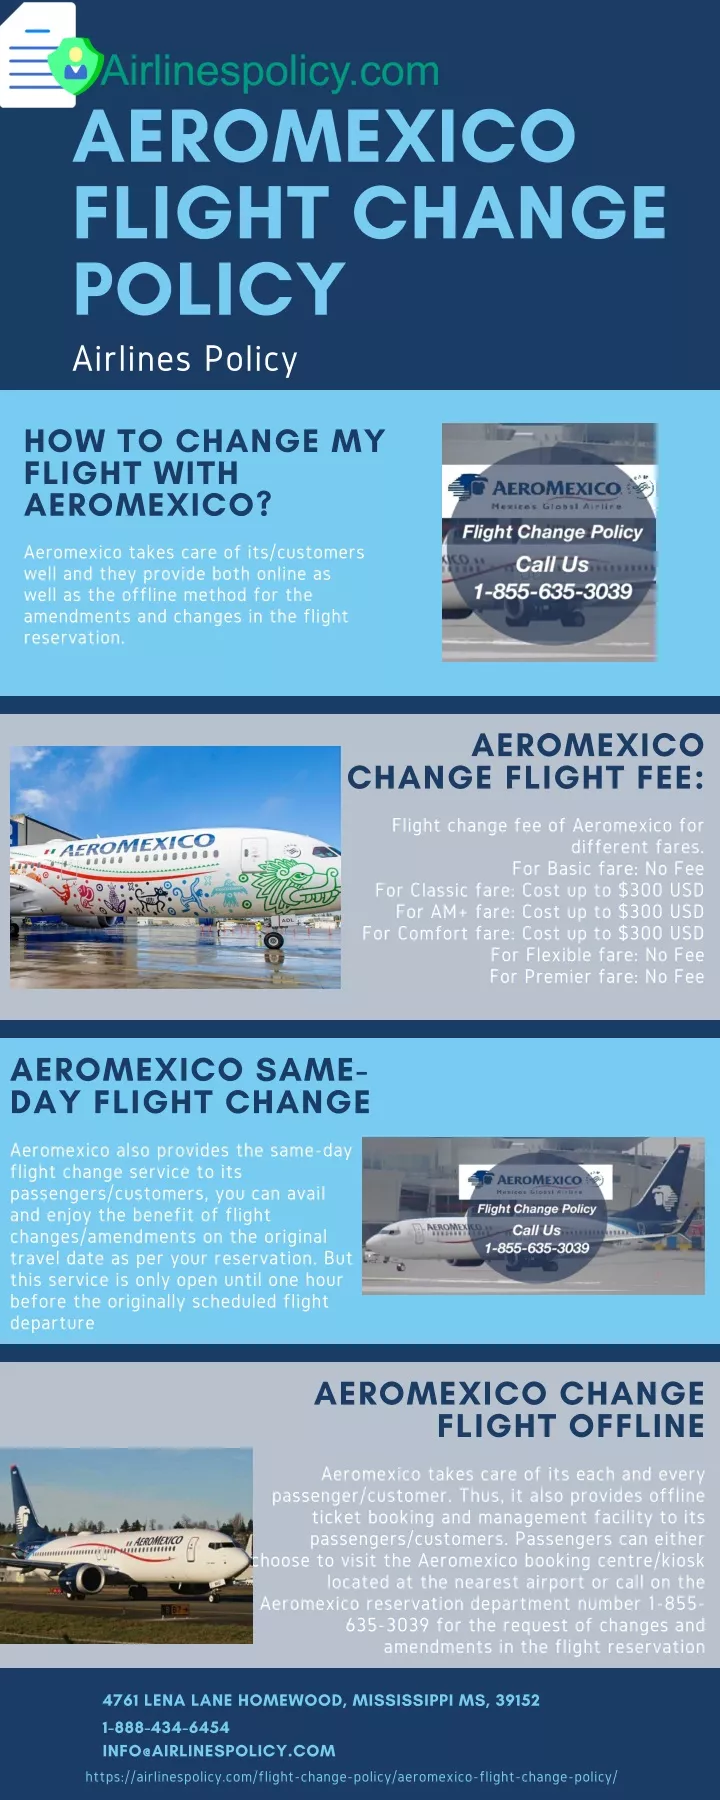 aeromexico flight change policy airlines policy